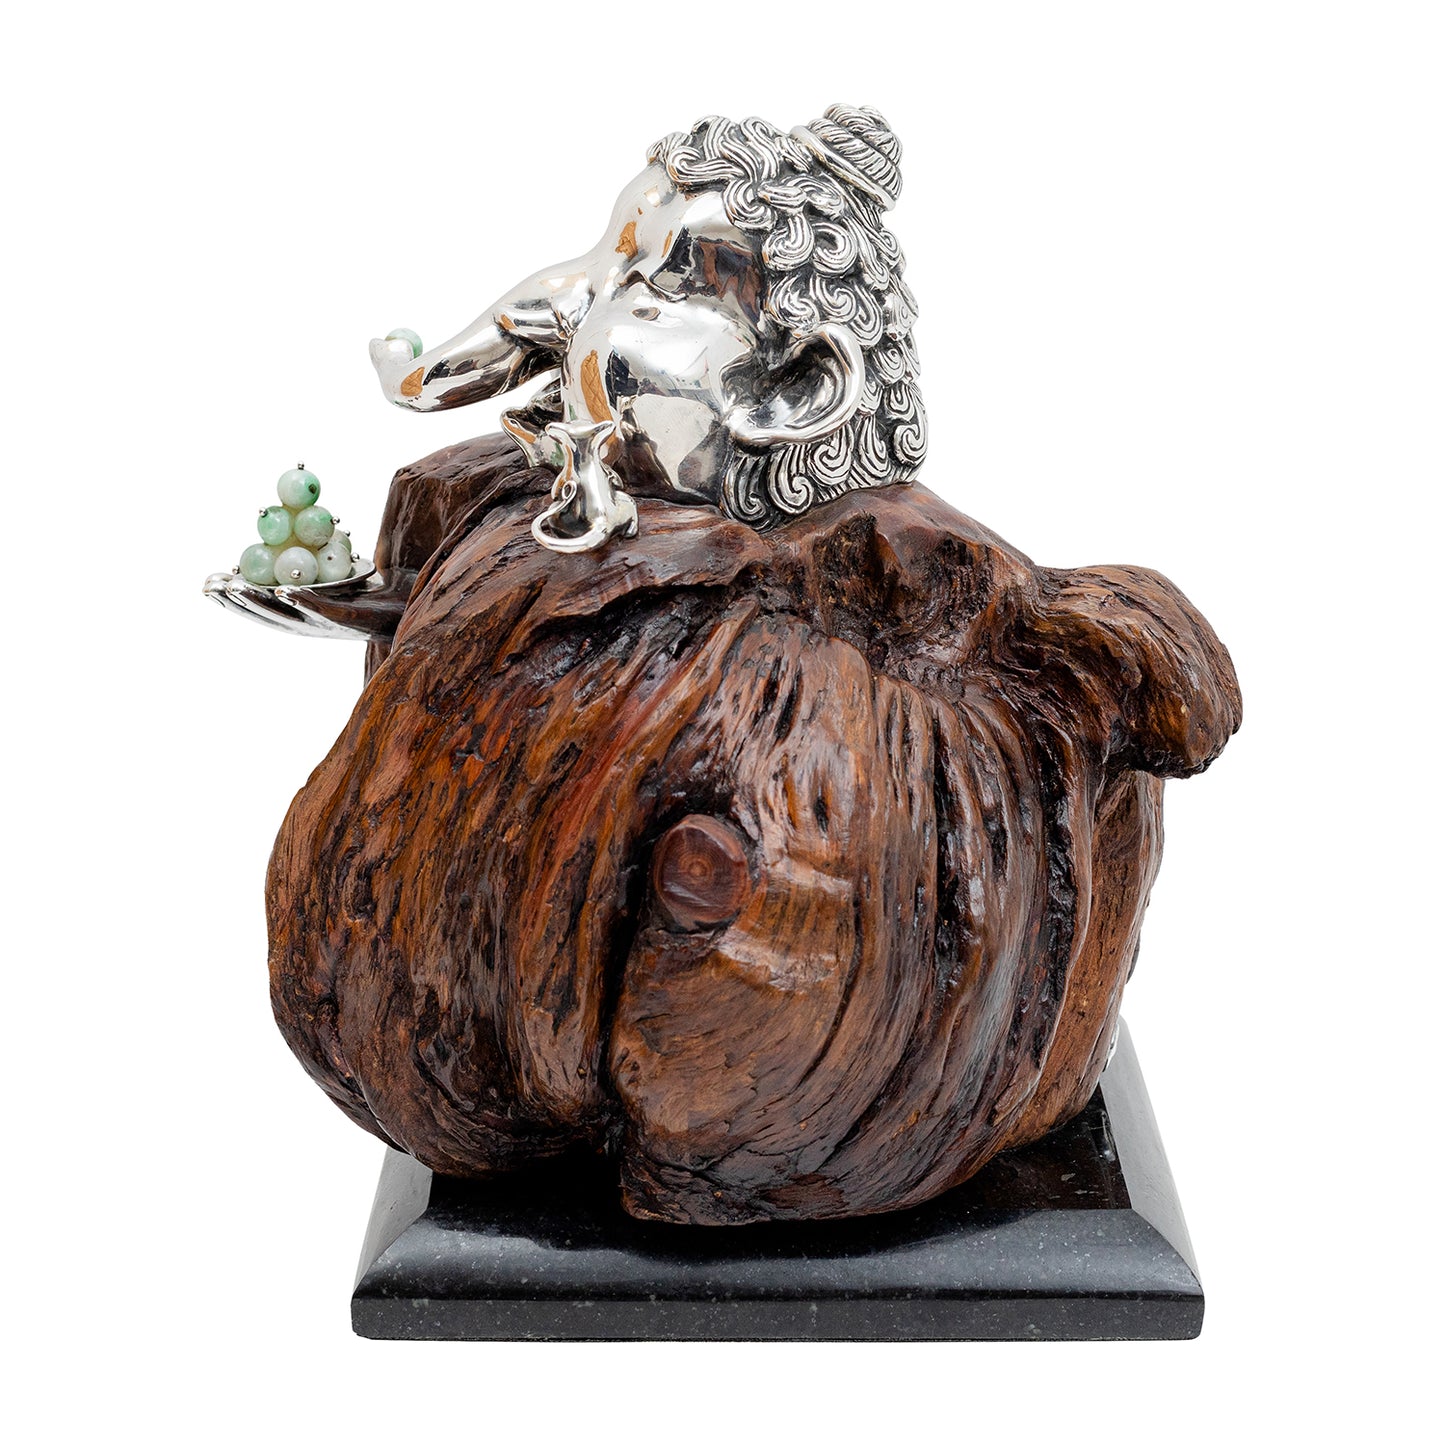 Ganesha Sculpture with Silver and Jade Bead